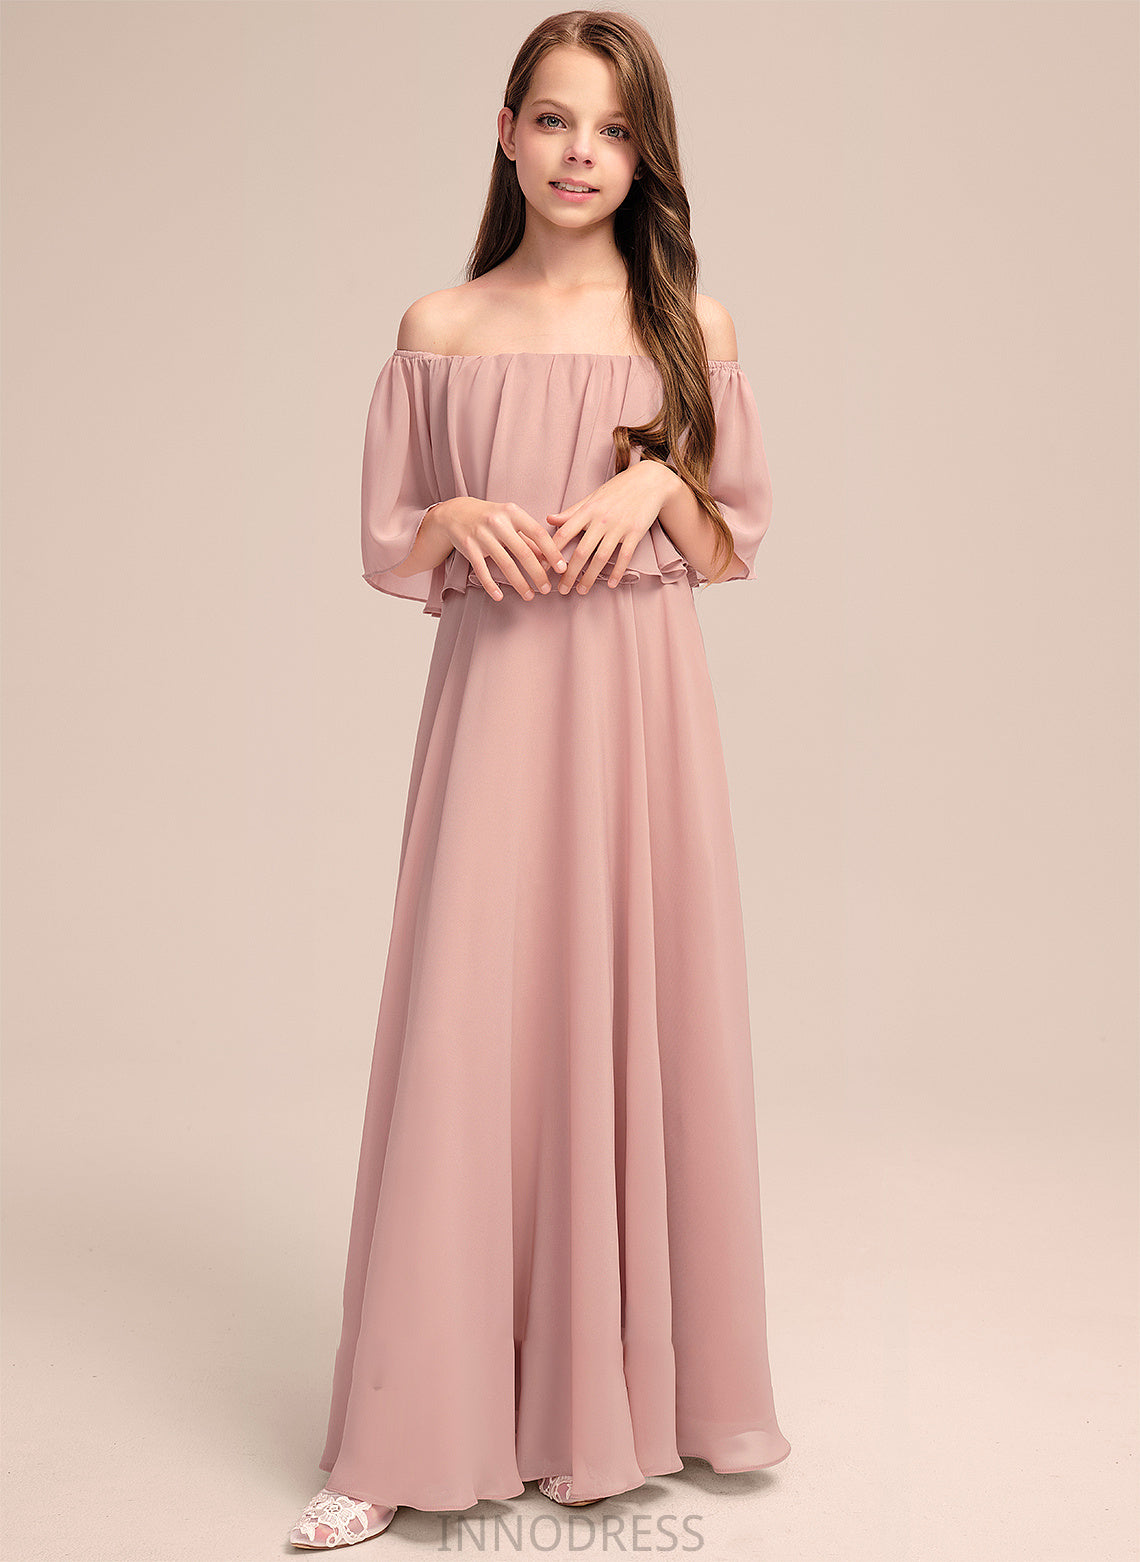 With Hallie A-Line Floor-Length Off-the-Shoulder Ruffle Chiffon Junior Bridesmaid Dresses